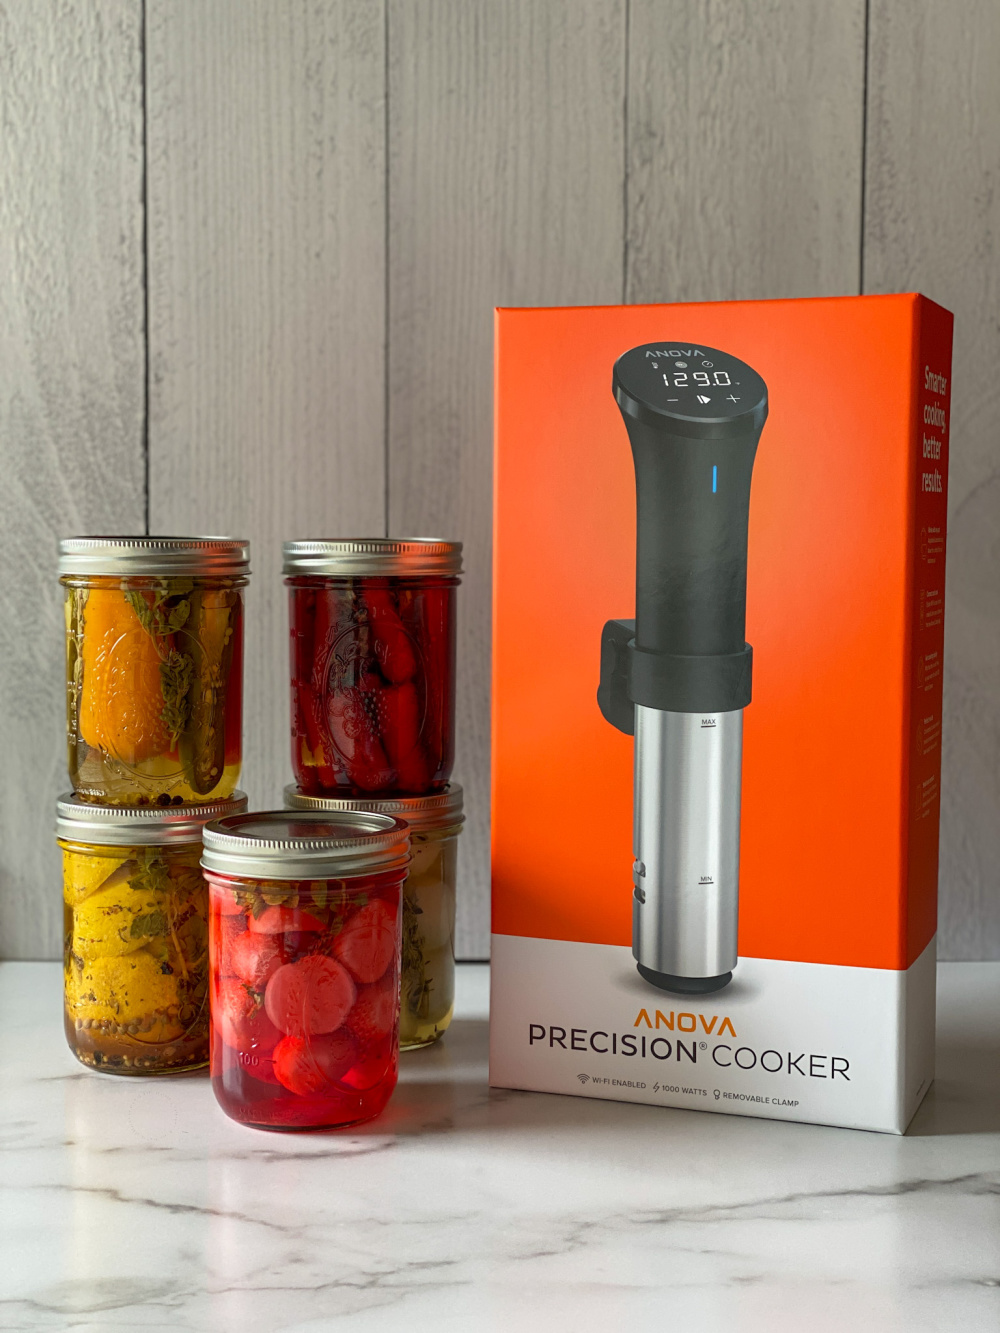 Showing the Anova precision cooker and five jars of pickles 